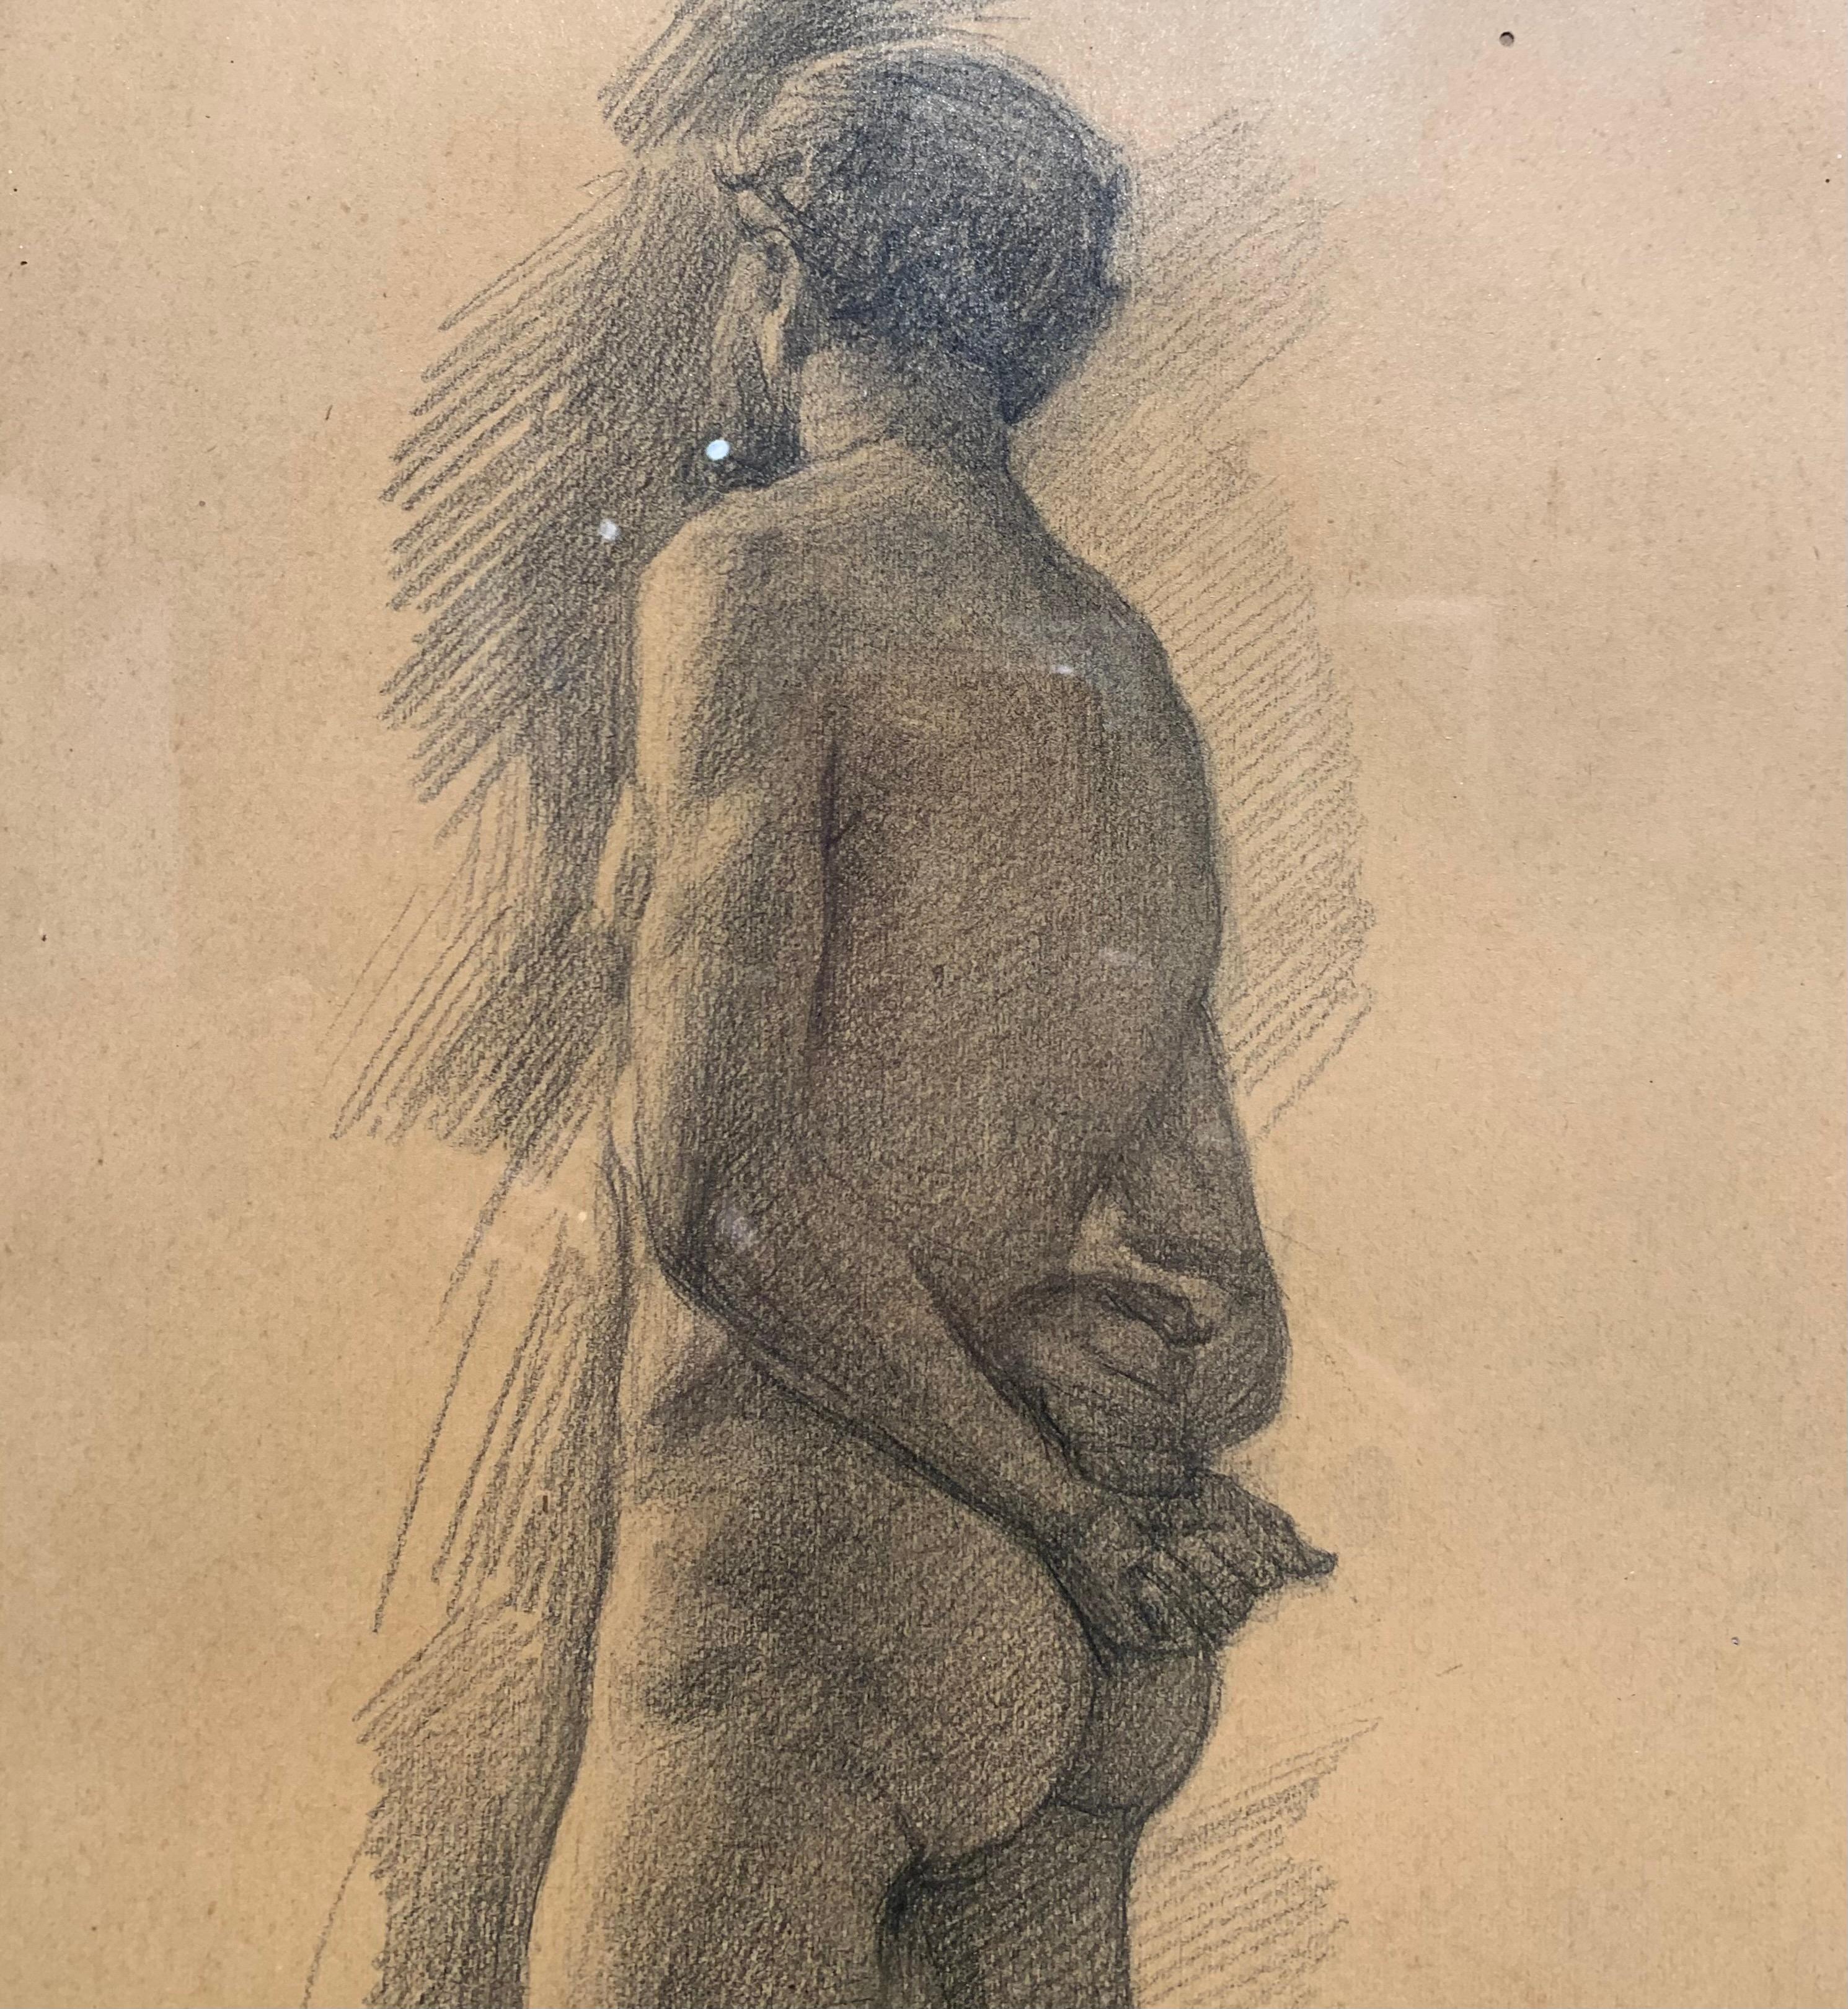 Male nude, male, pencil, 1890,study
Shipping free
Frame cm. 46 x 56 
No frame cm 31x41